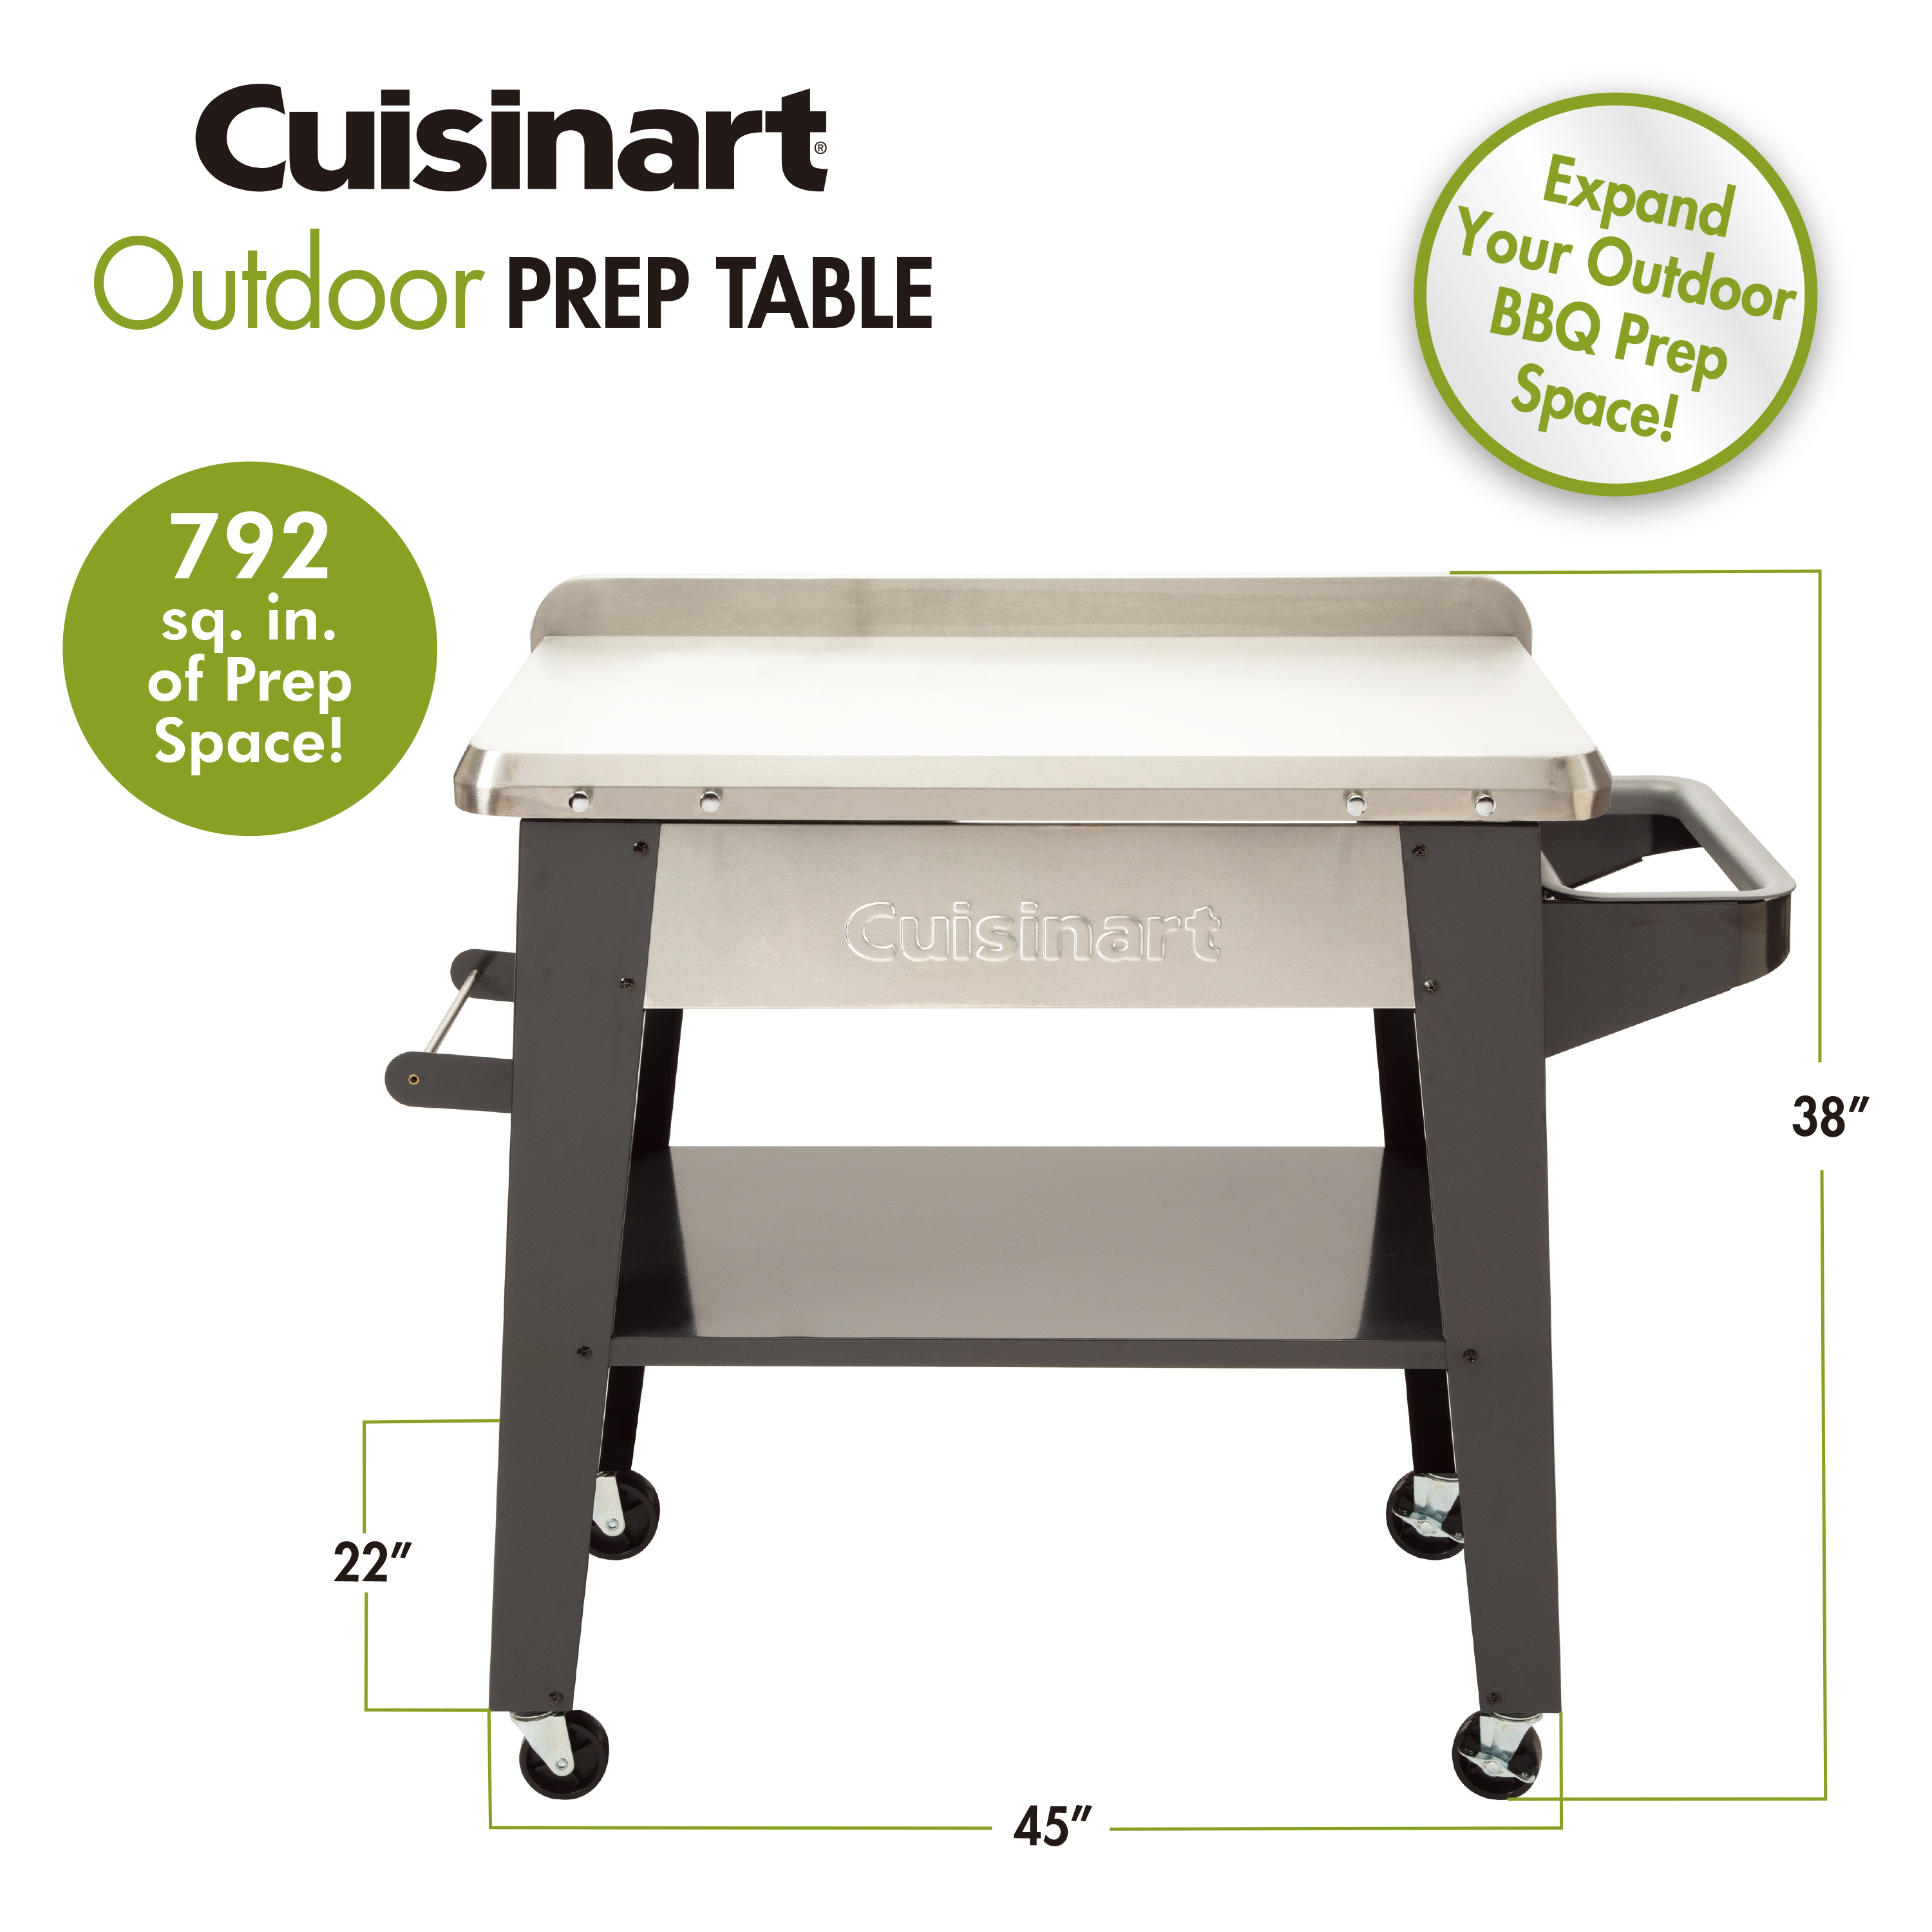 Cuisinart Stainless Steel Outdoor Prep Table - image 4 of 8